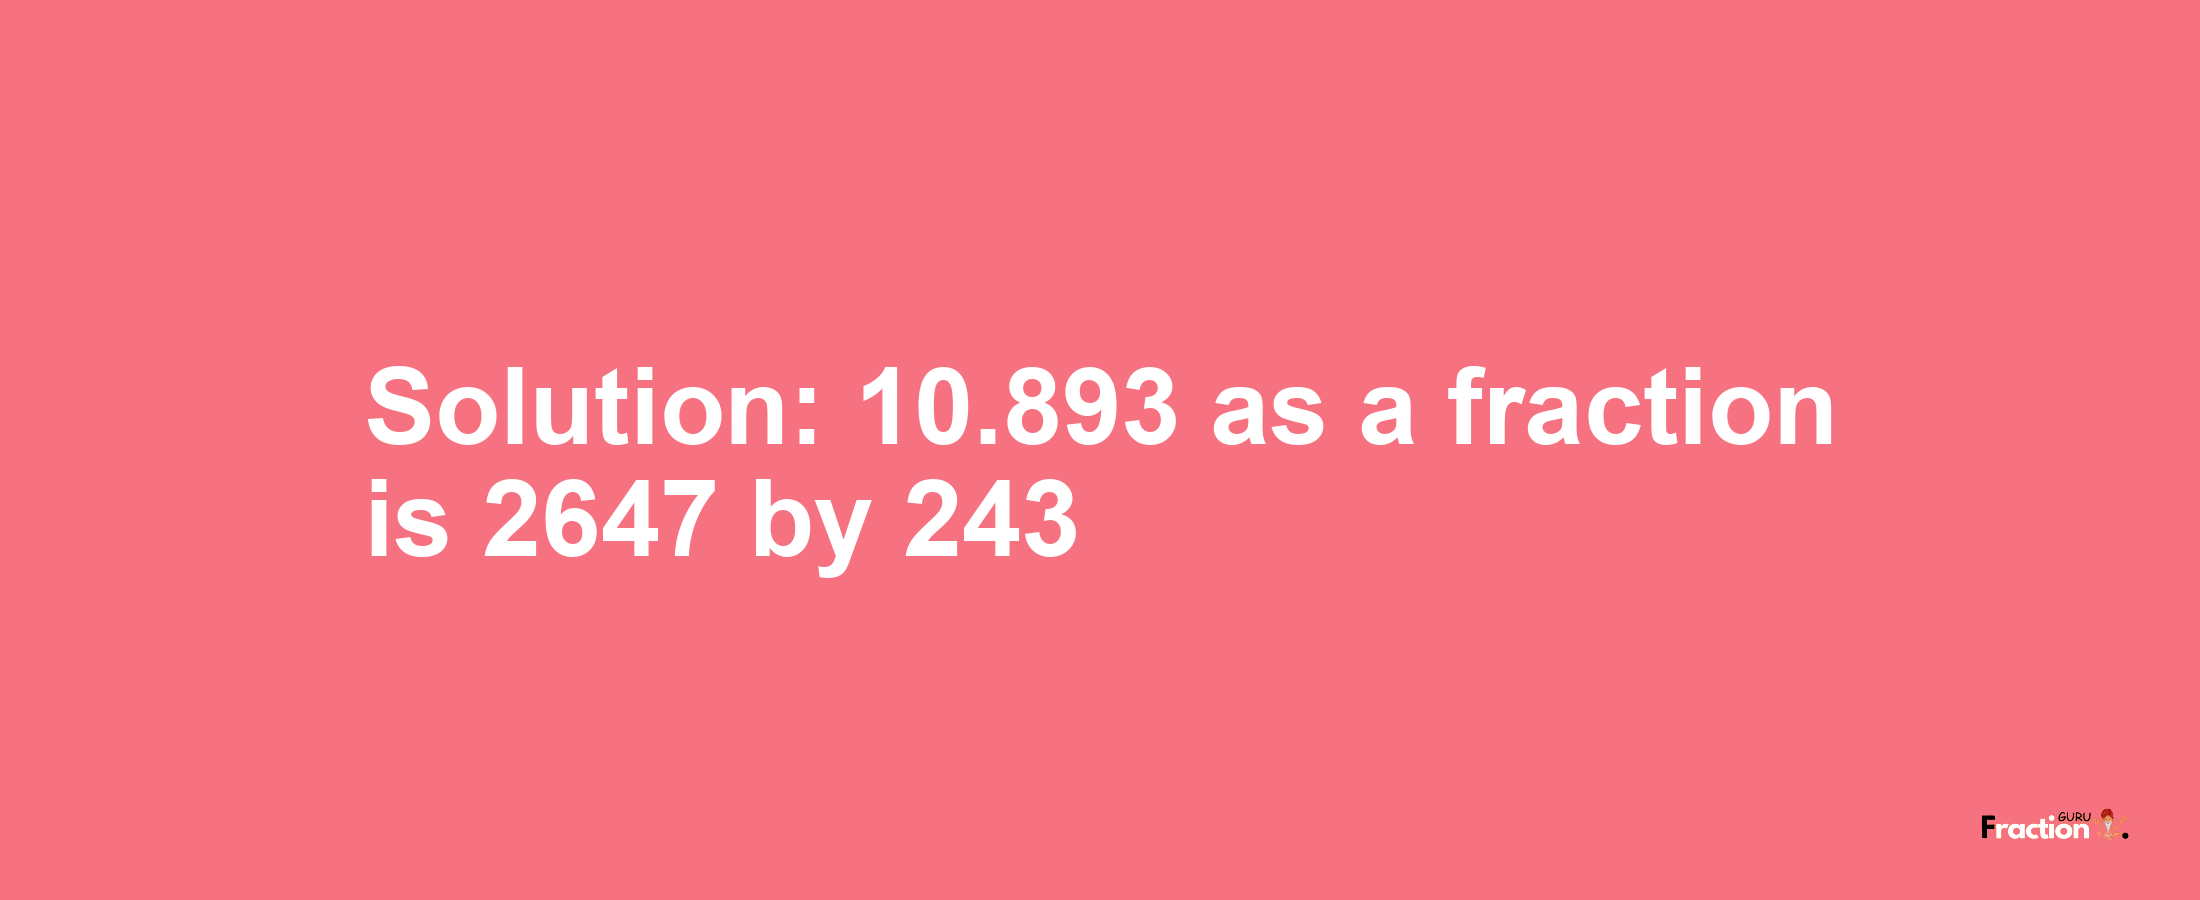 Solution:10.893 as a fraction is 2647/243